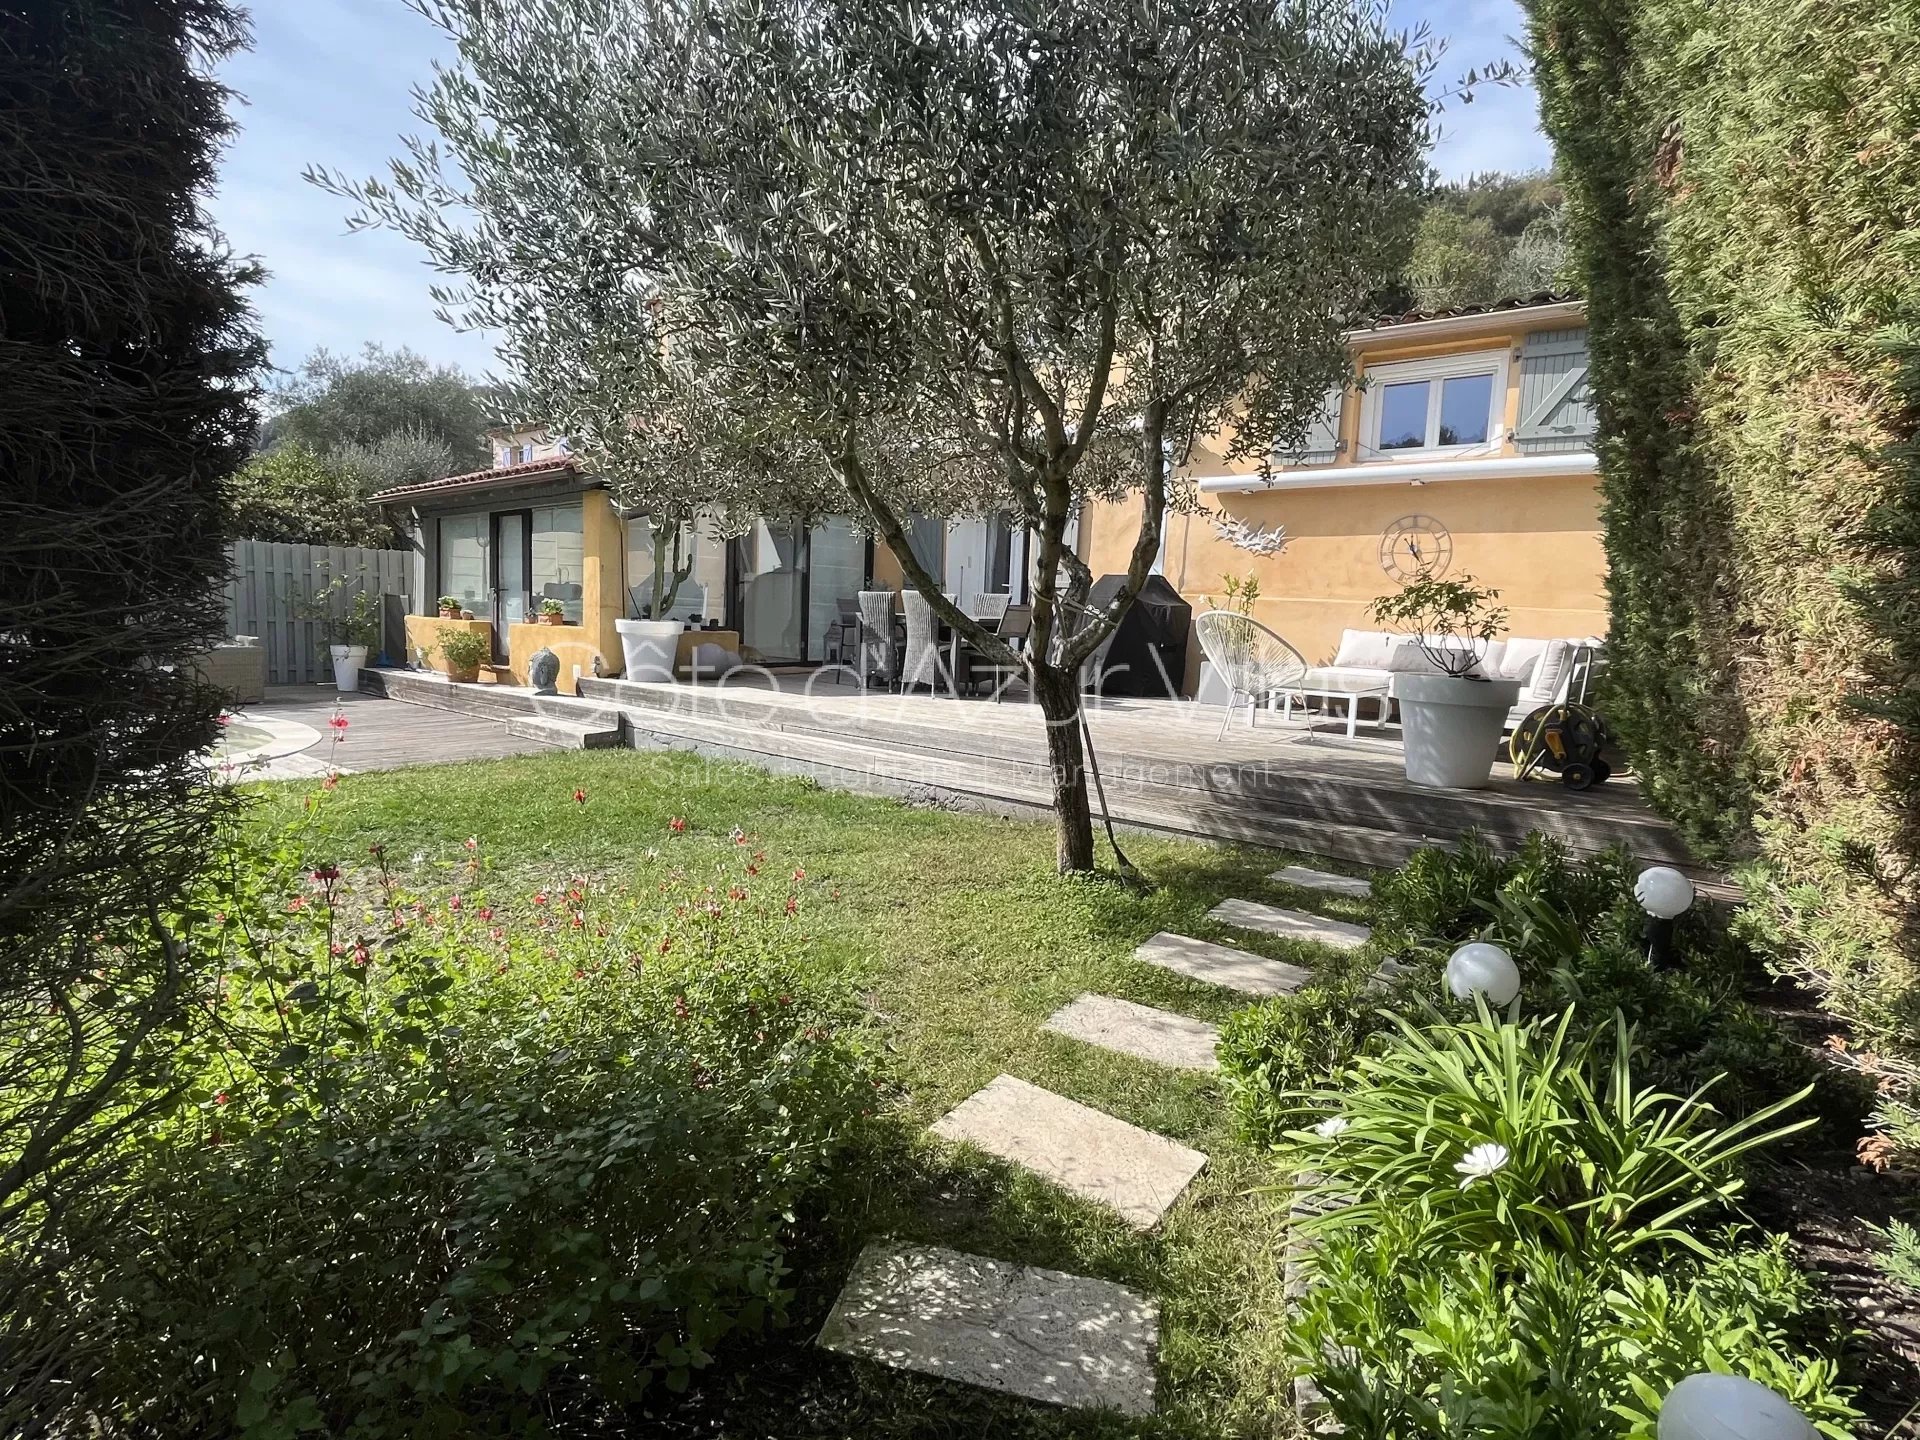 Biot - 3 bedroom detached house in a domain in a quiet area